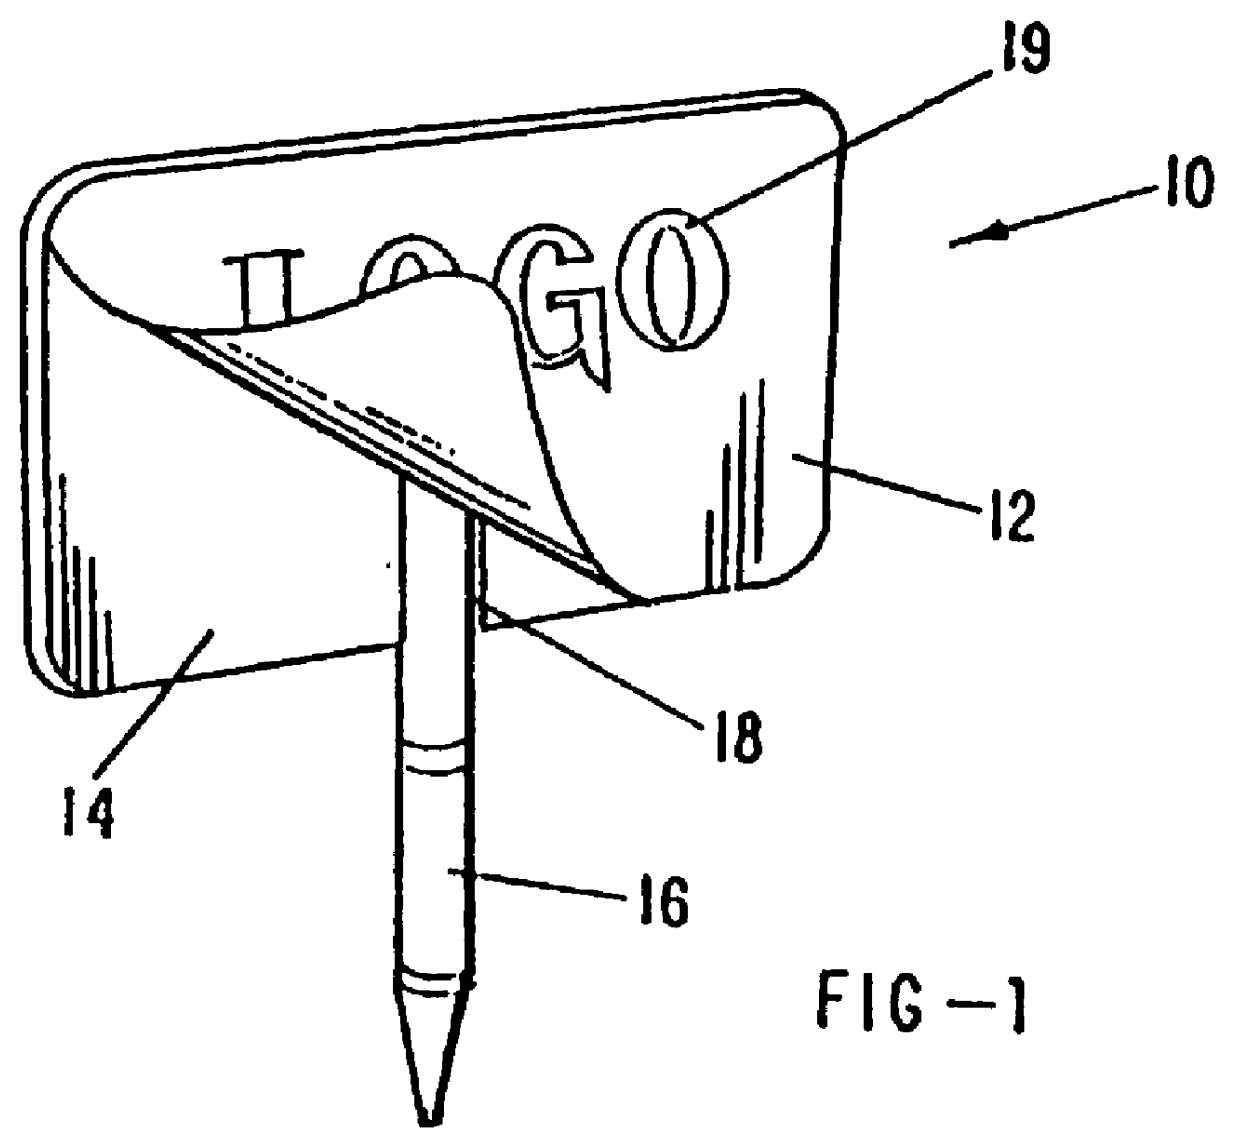 Writing implement attachment